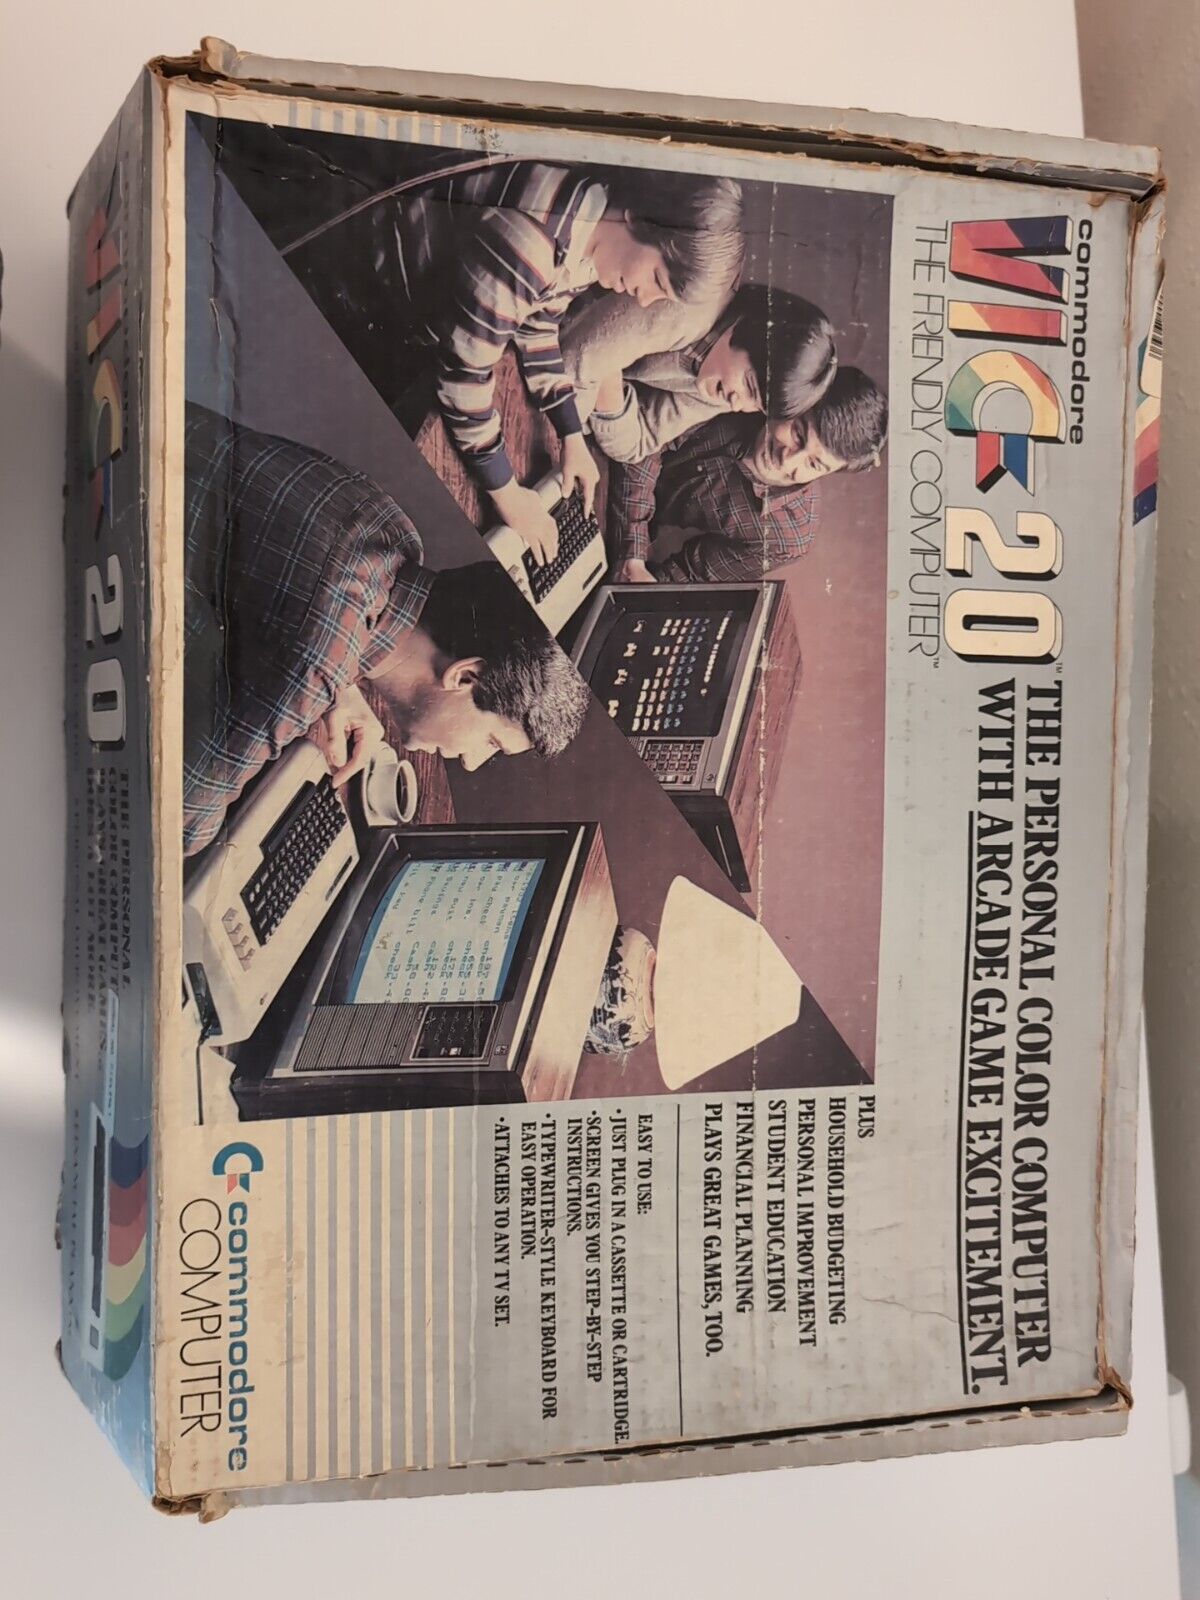 COMMODORE VIC-20 COMPUTER SYSTEM Tested and Working.